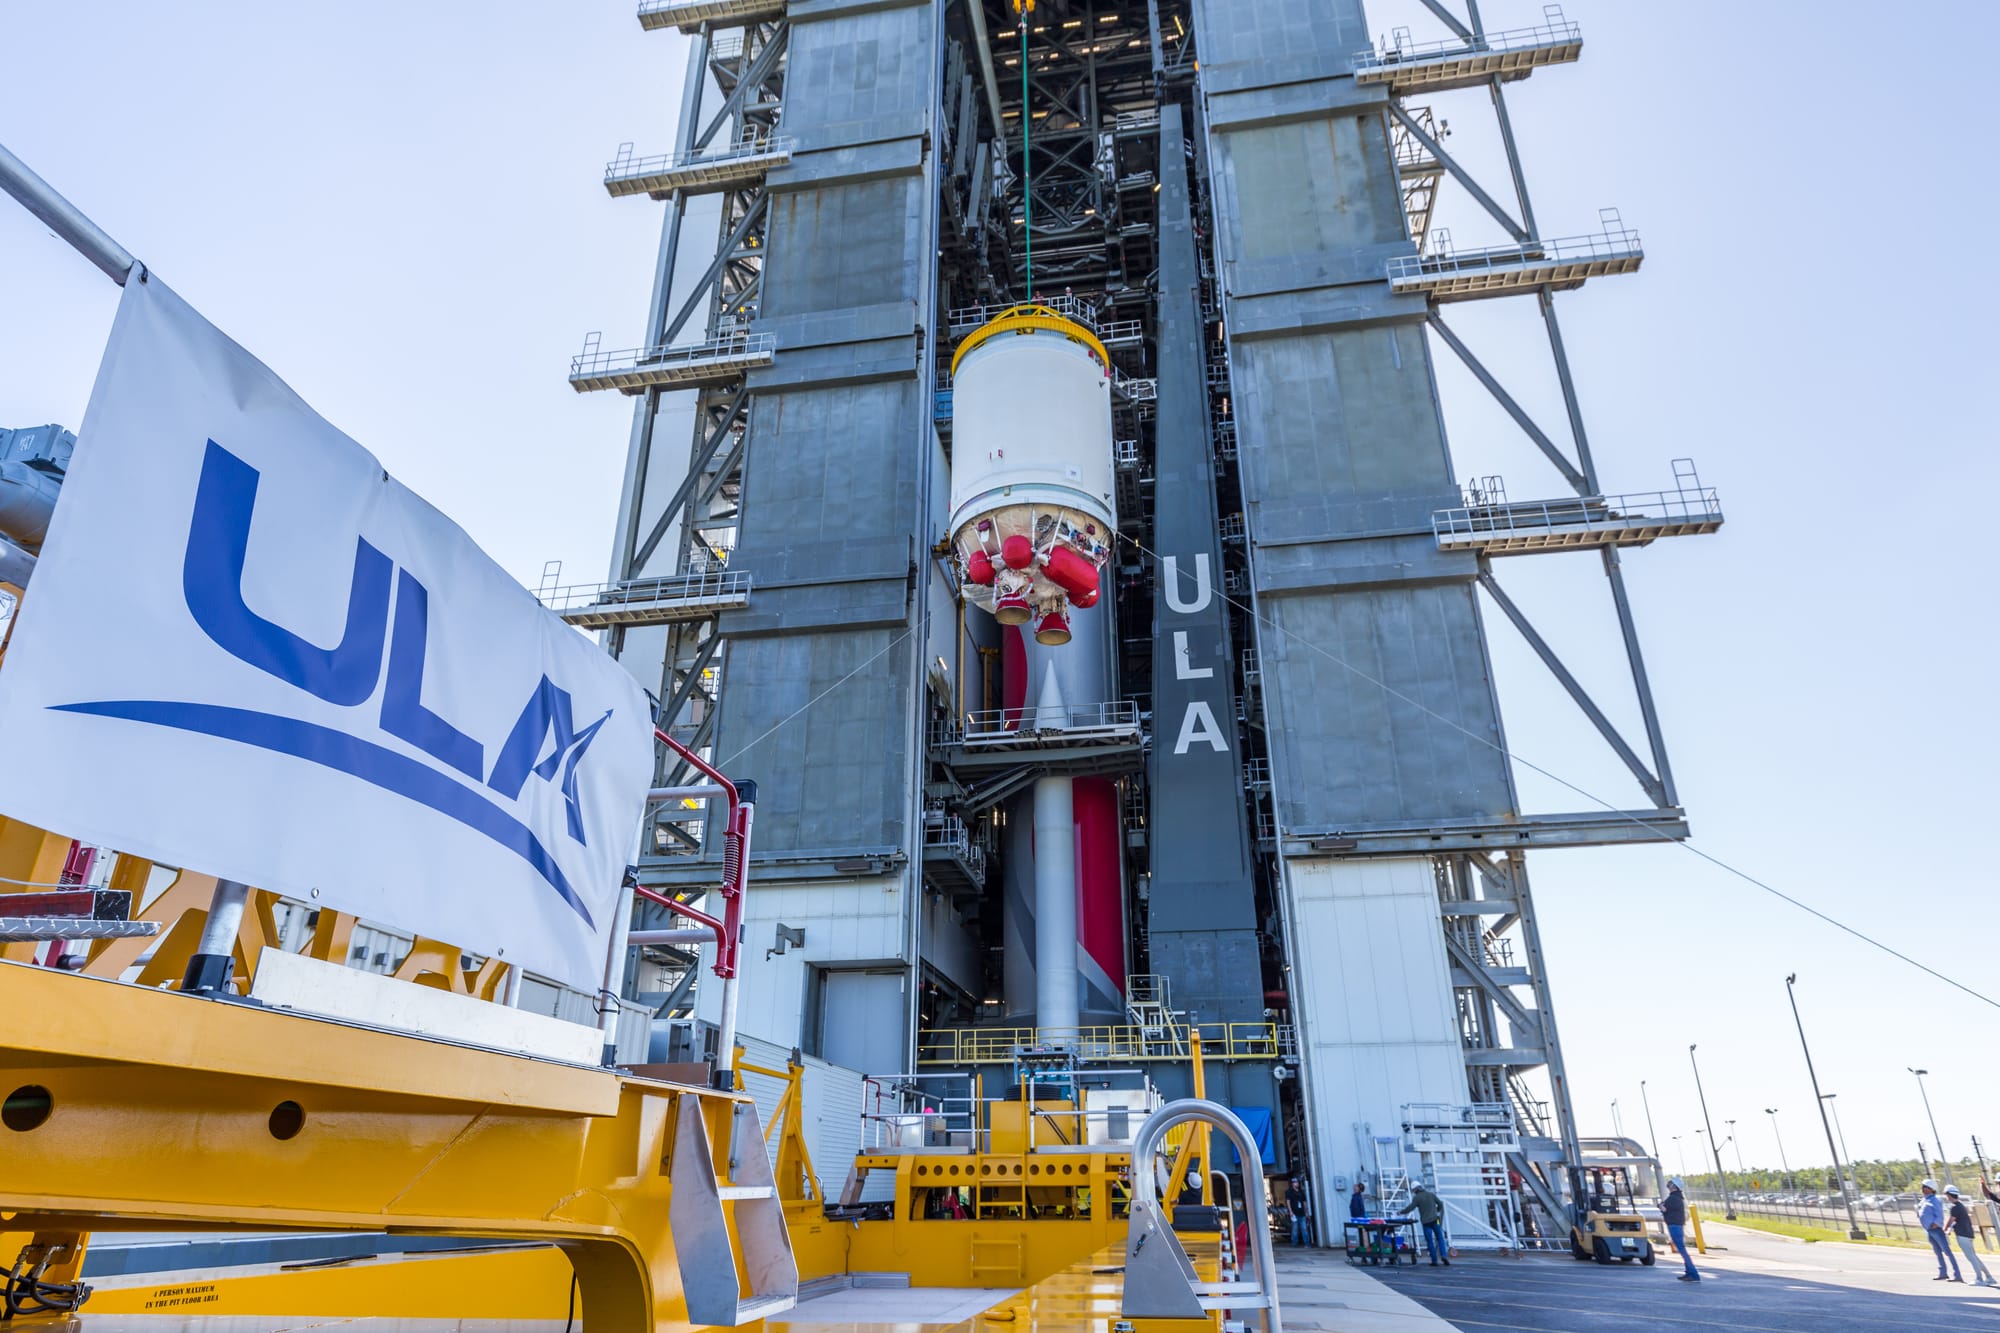 Vulcan-Centaur's second-stage being lifted onto the first-stage. ©United Launch Alliance